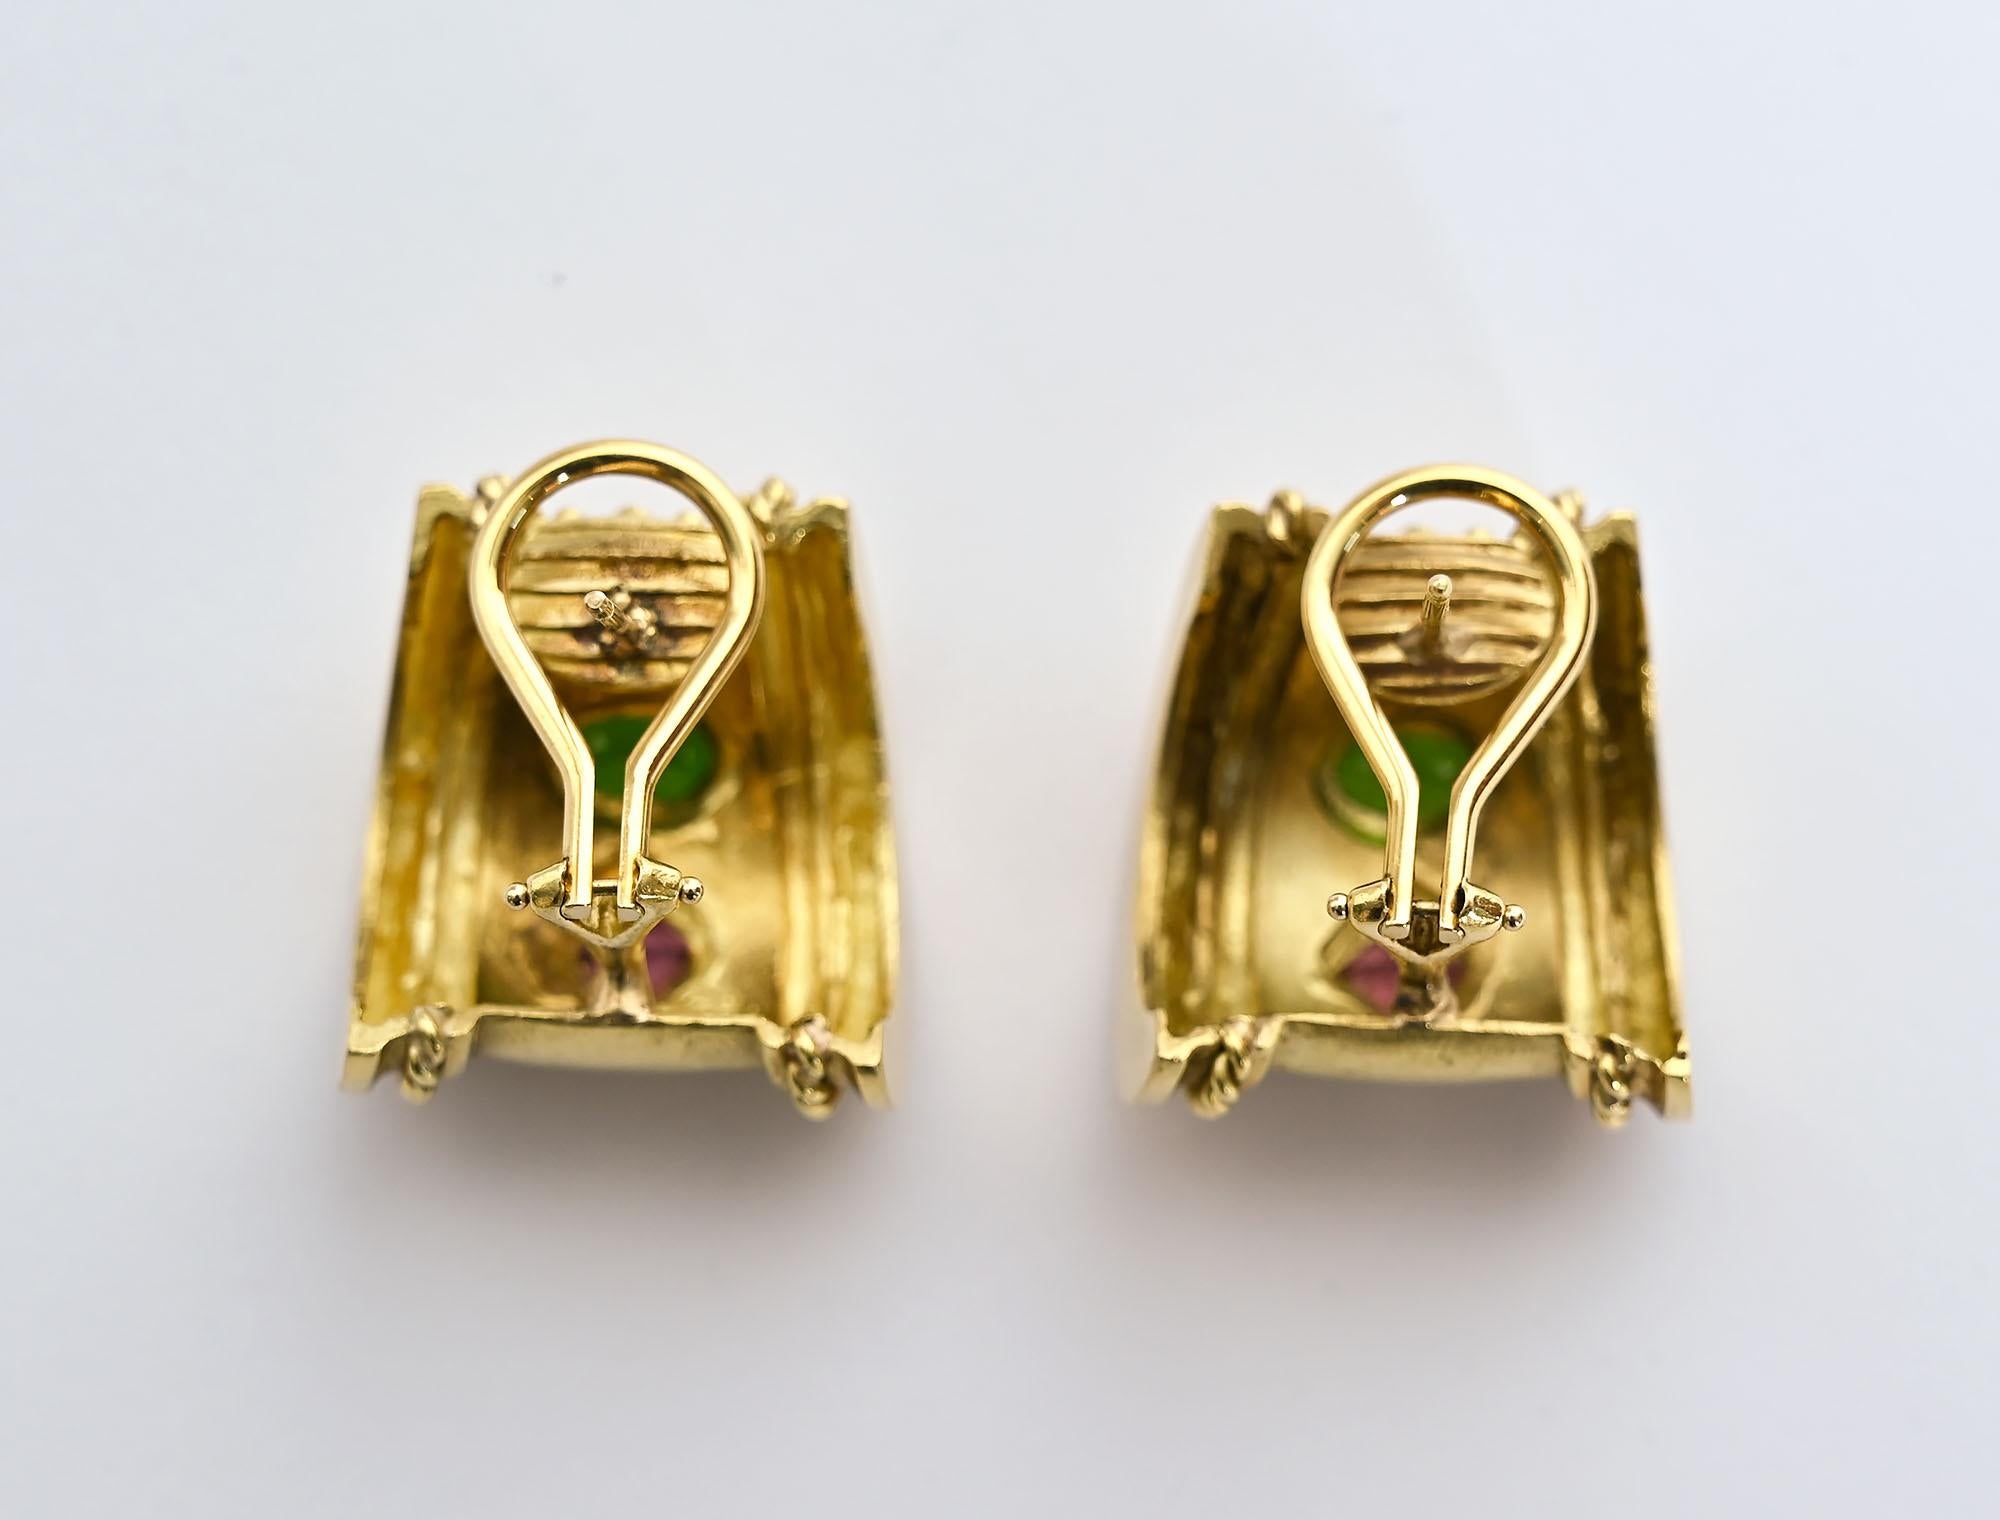 Seidengang Gold Earrings with Gemstones In Excellent Condition For Sale In Darnestown, MD